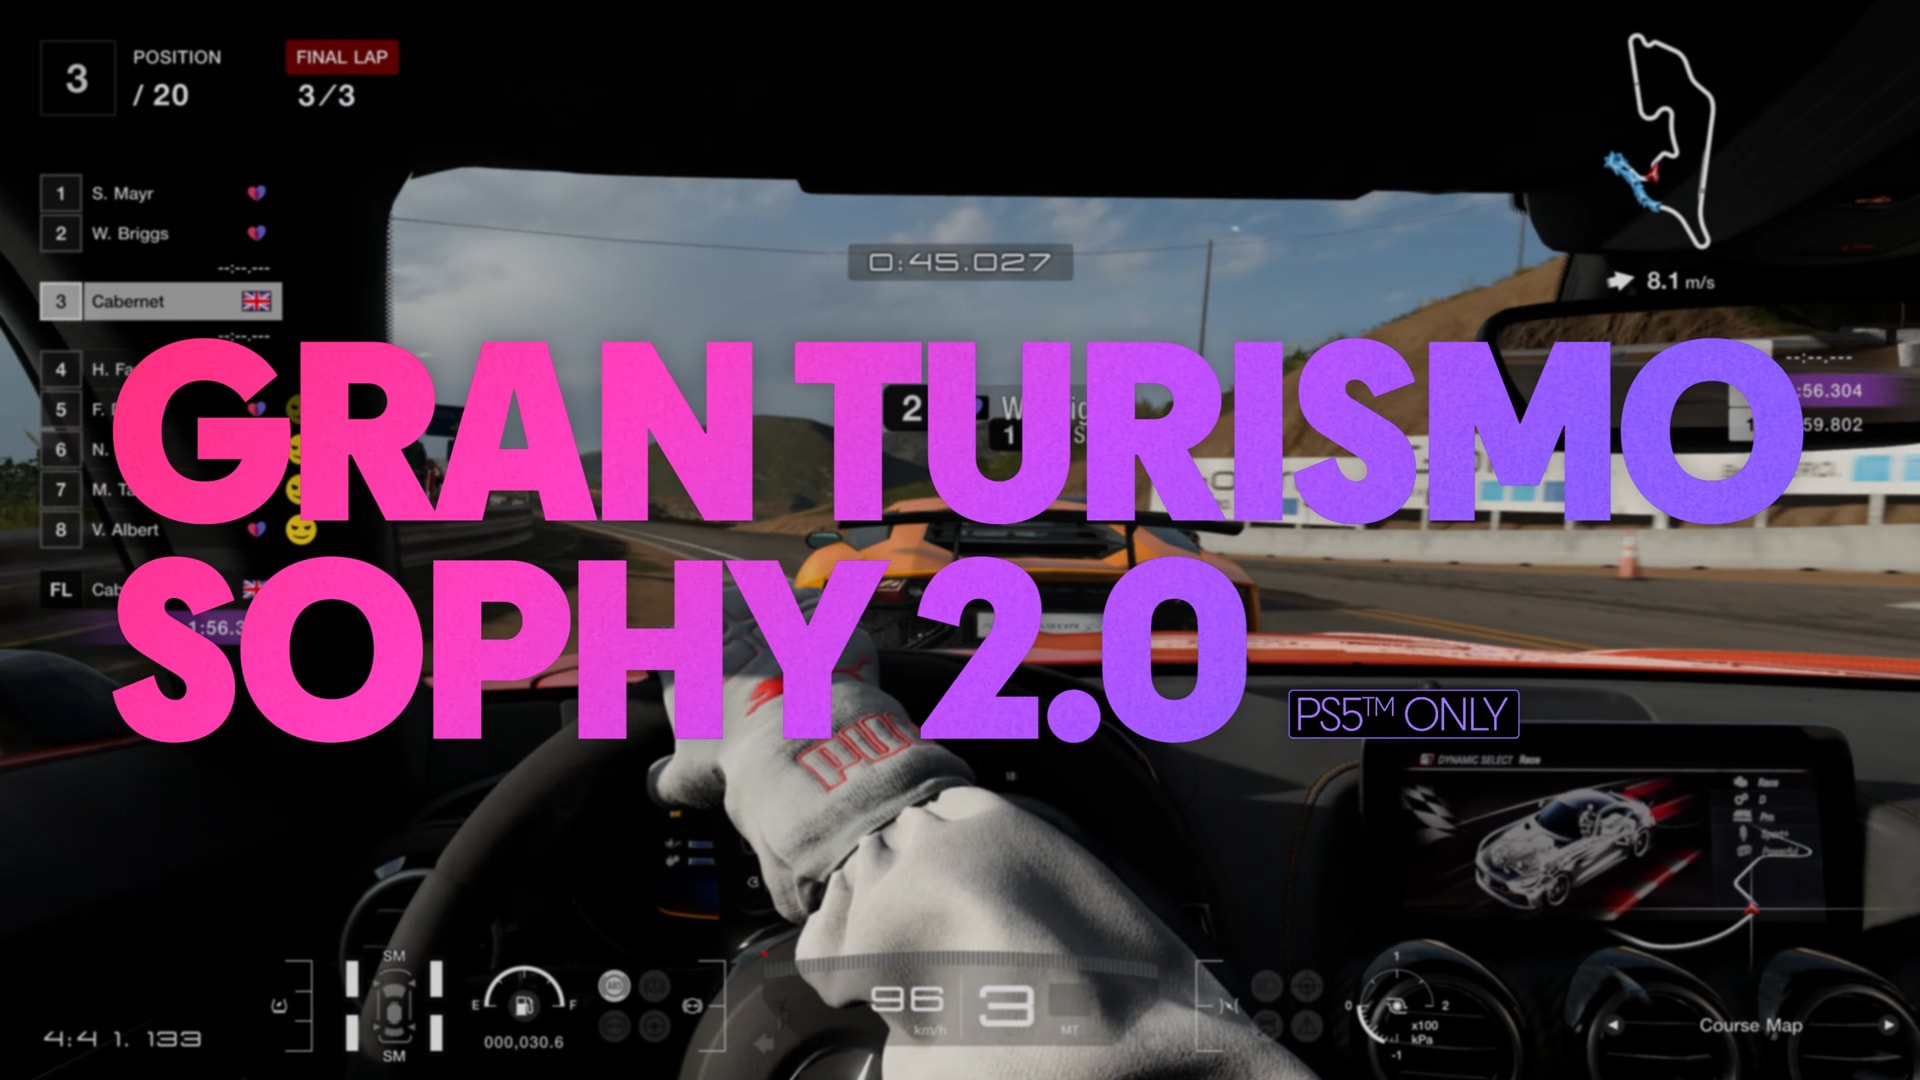 What Is Sophy, and Why Are Gran Turismo Players in Love With It? -  autoevolution